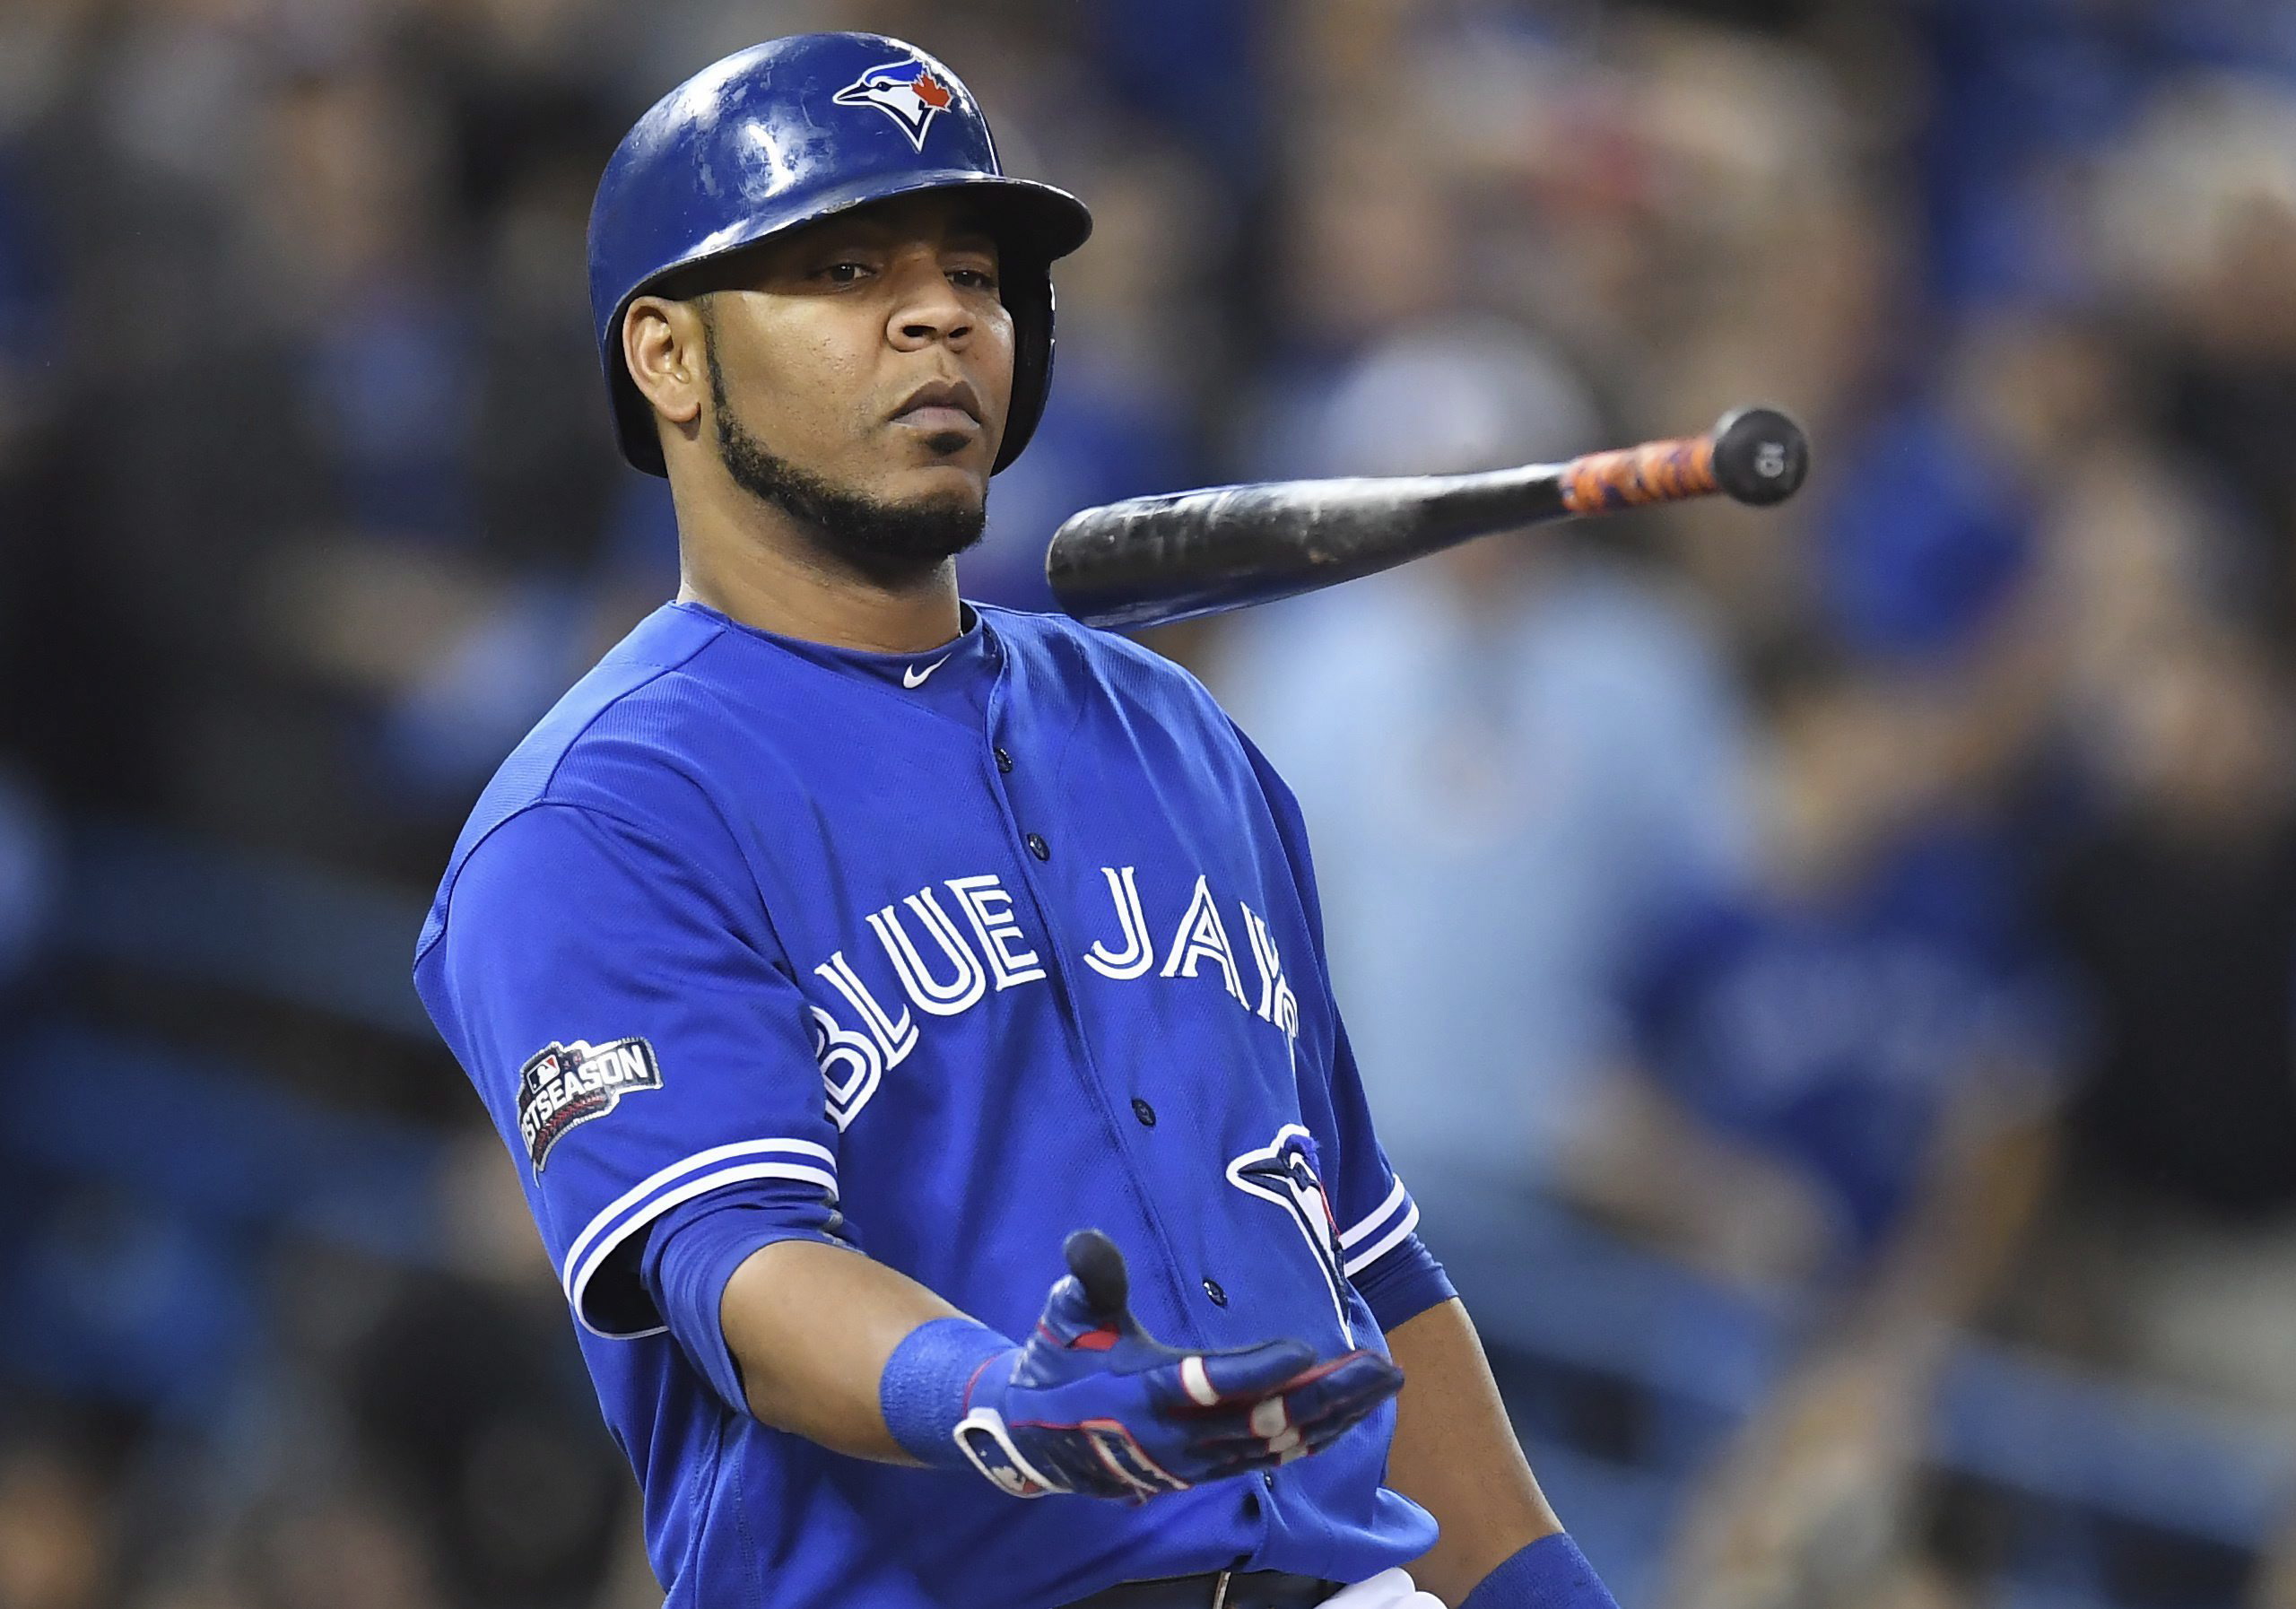 Free agent slugger Edwin Encarnacion has reached agreement on a contract with the Cleveland Indians. The sides reached a deal on Thursday night, Dec. 22, 2016 pending a physical. Encarnacion hit 42 homers and drove in 127 runs last season.